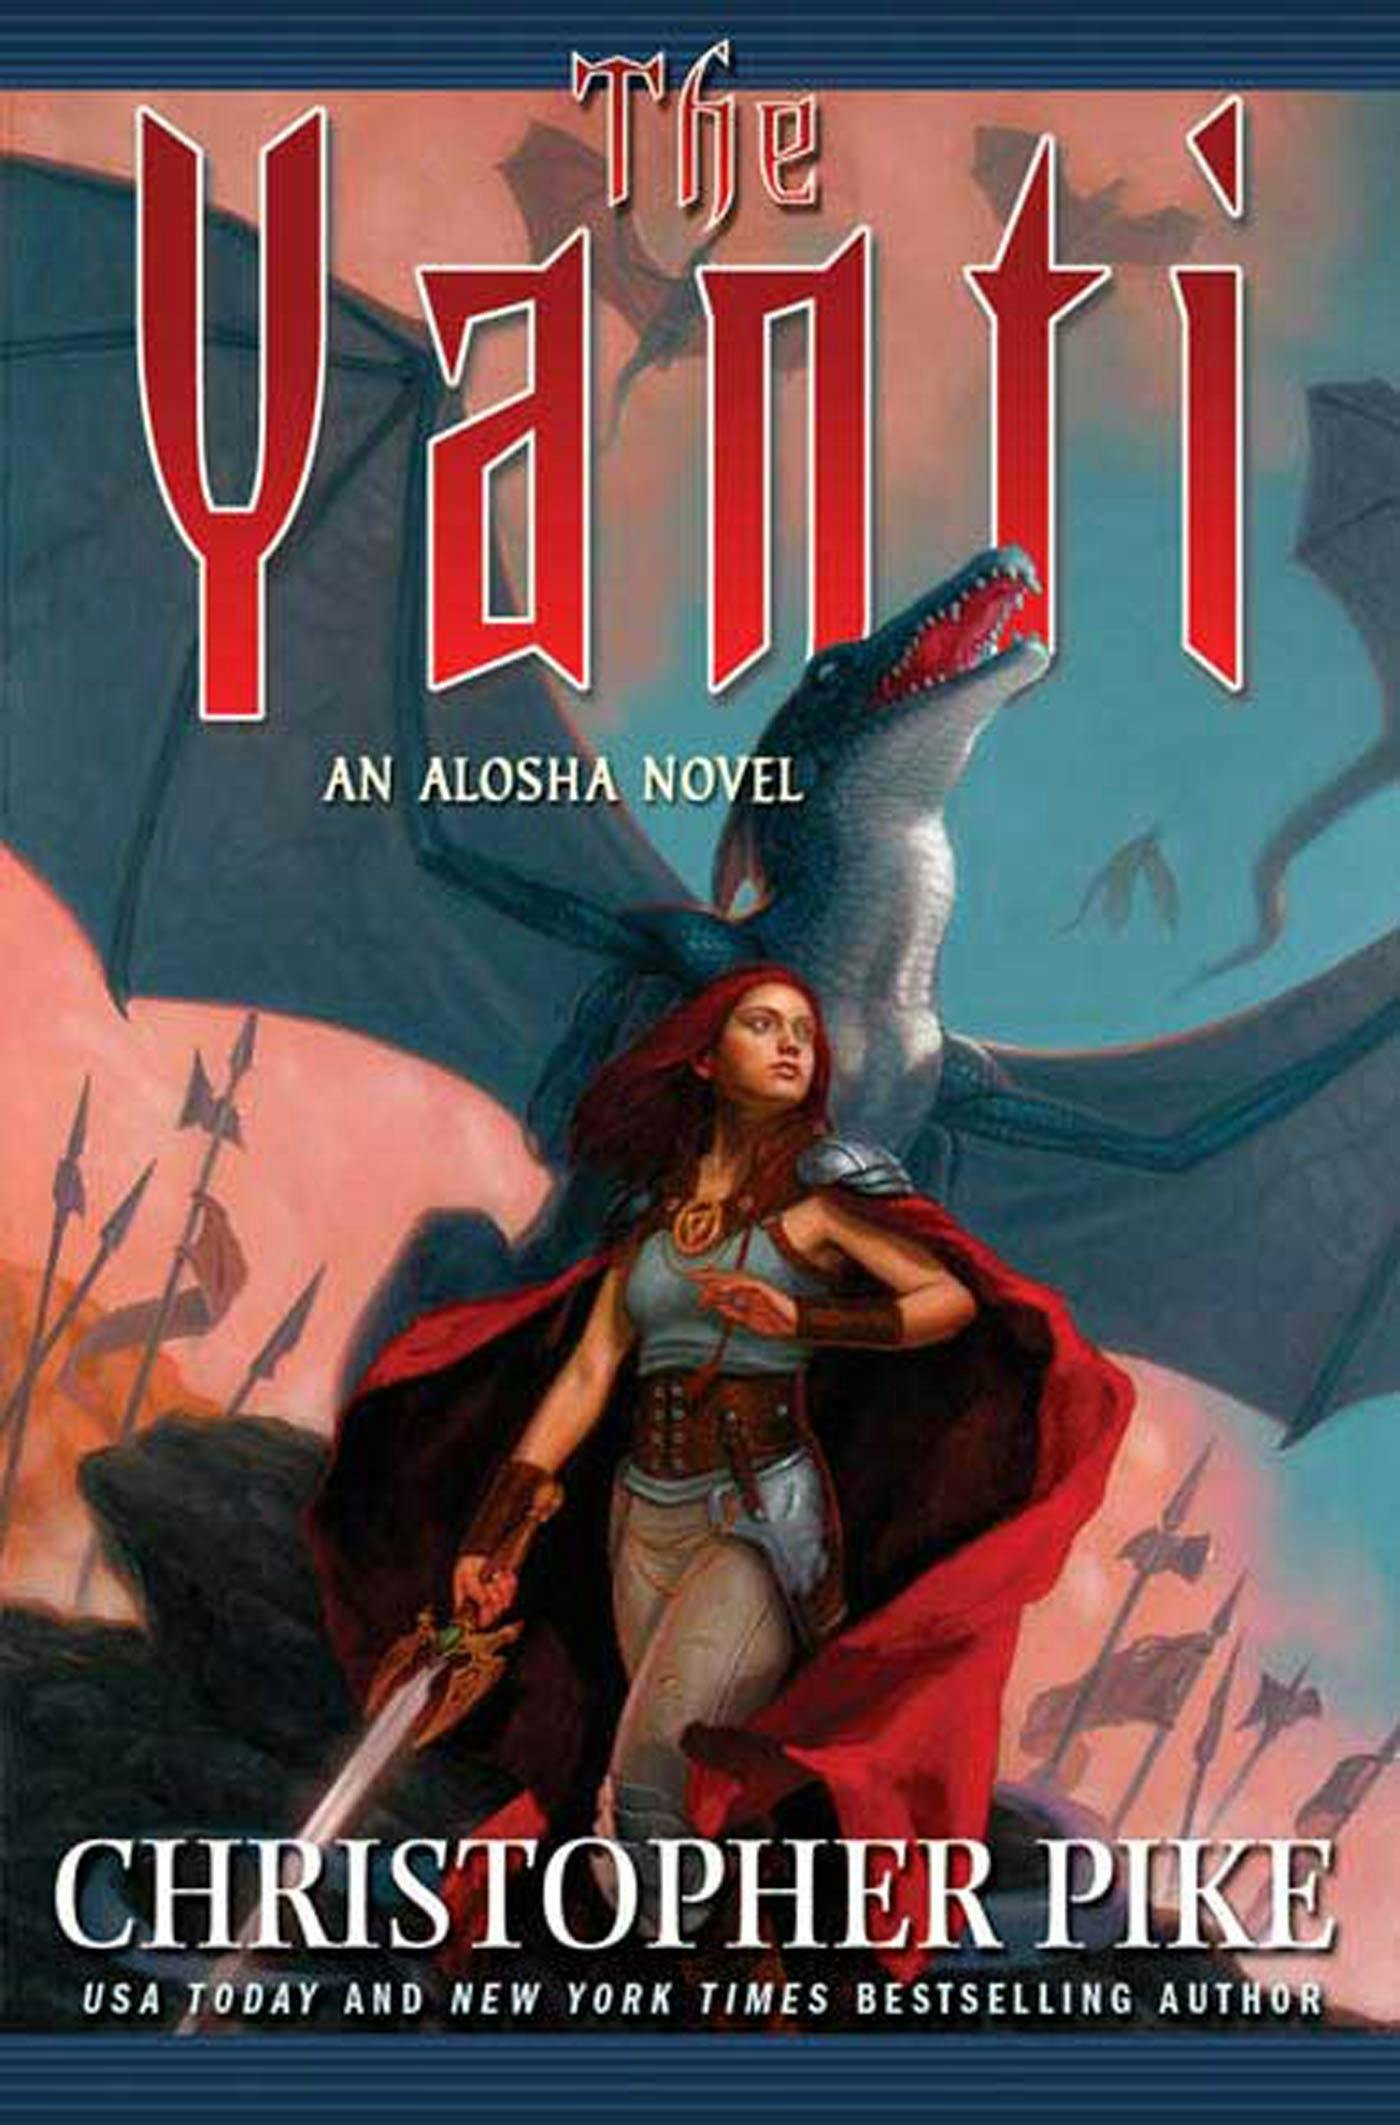 Cover for the book titled as: The Yanti